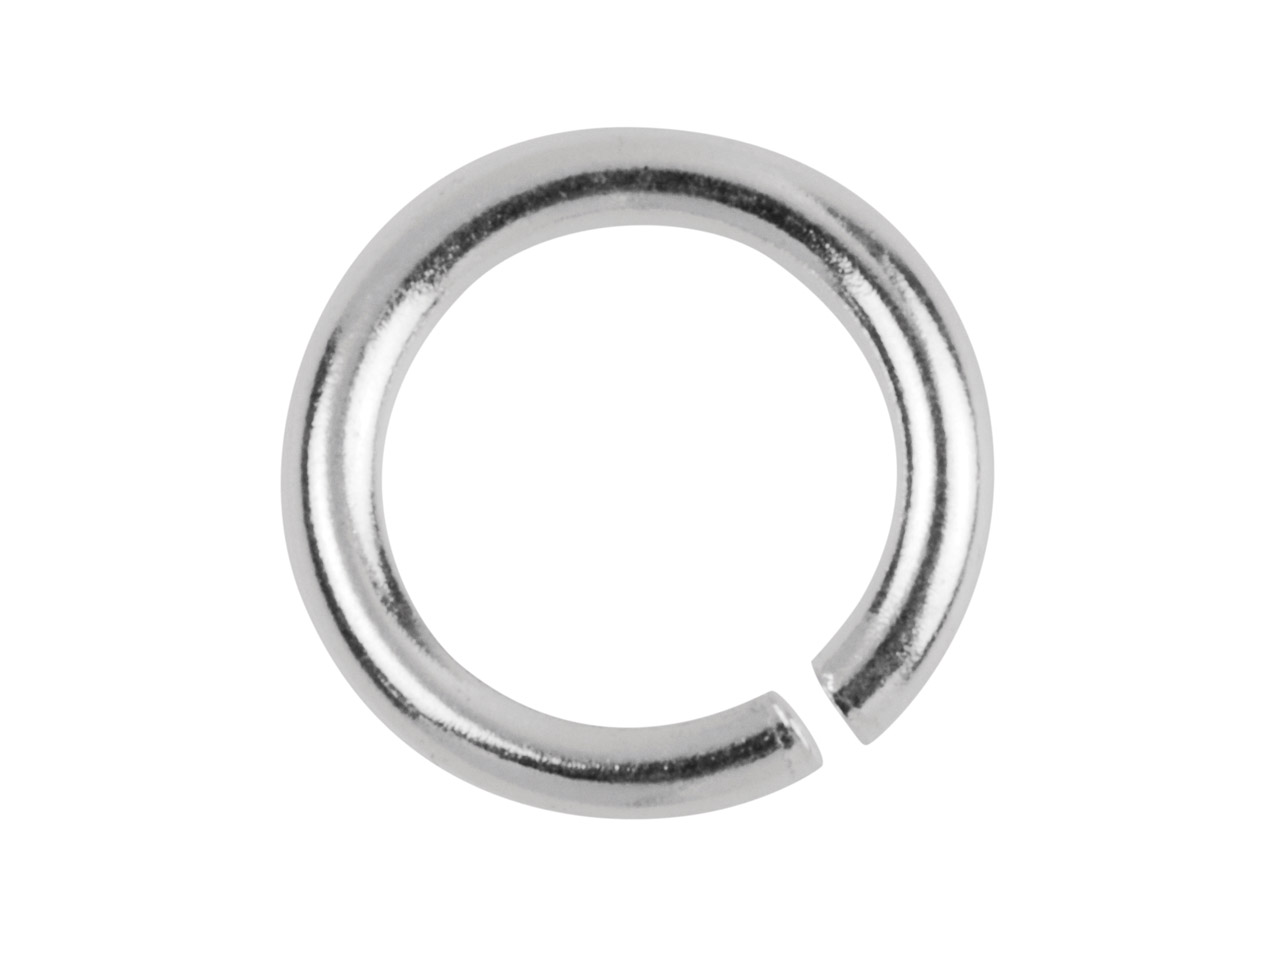 CLEARANCE 5mm Open Jumprings / Jump Rings (100 pcs / Light Silver